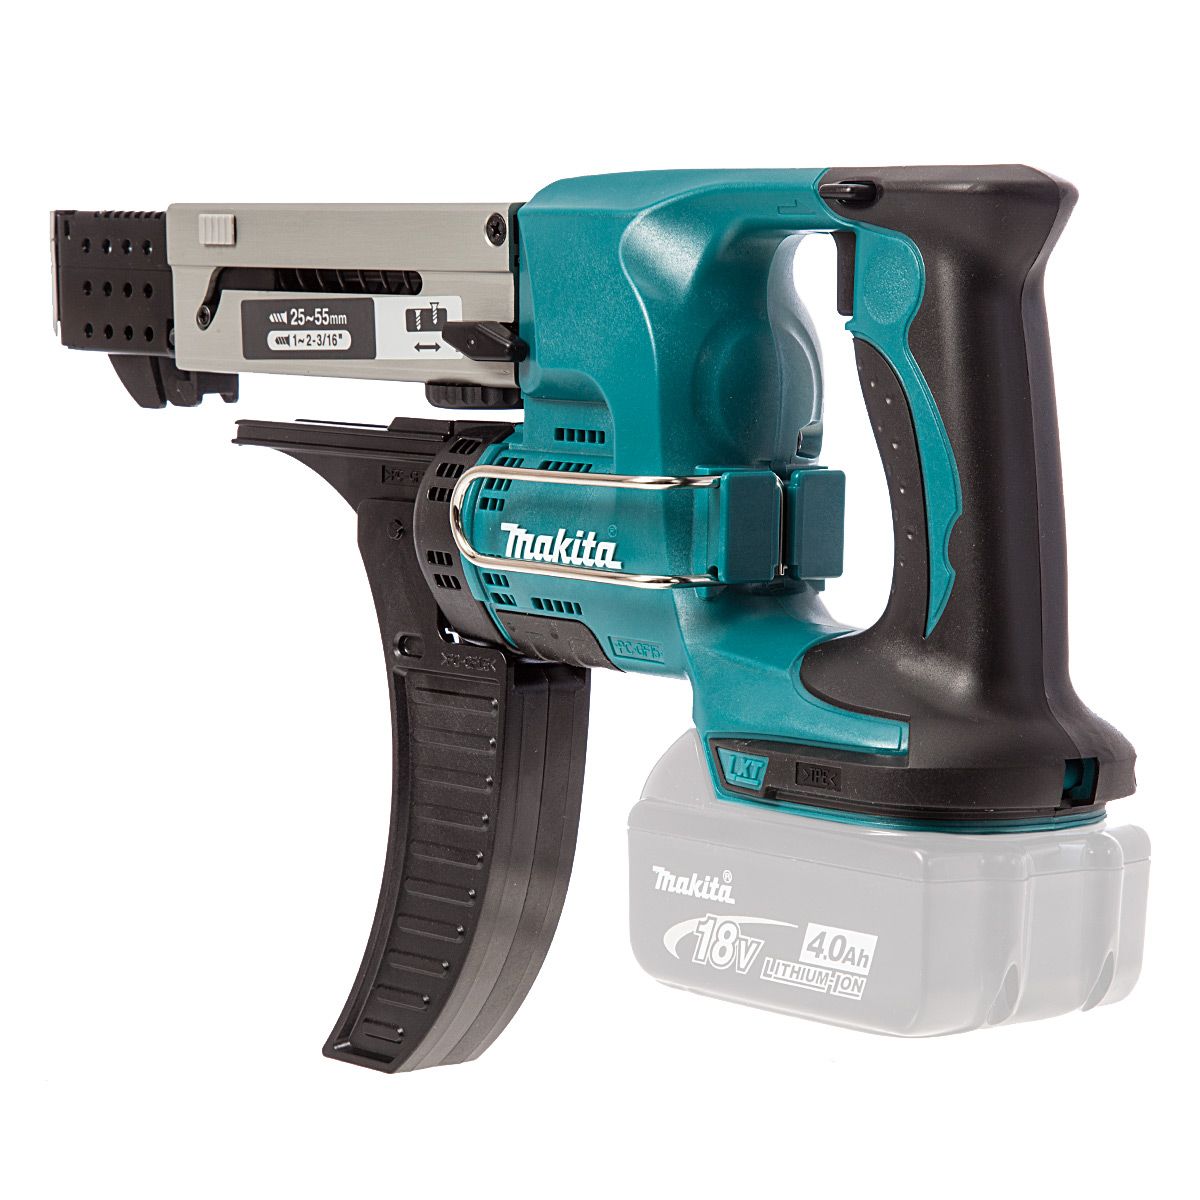 Makita DFR750Z 18 V Li-ion Auto-Feed Screwdriver No Batteries Included & F-31140 Collated Screwstrips Black